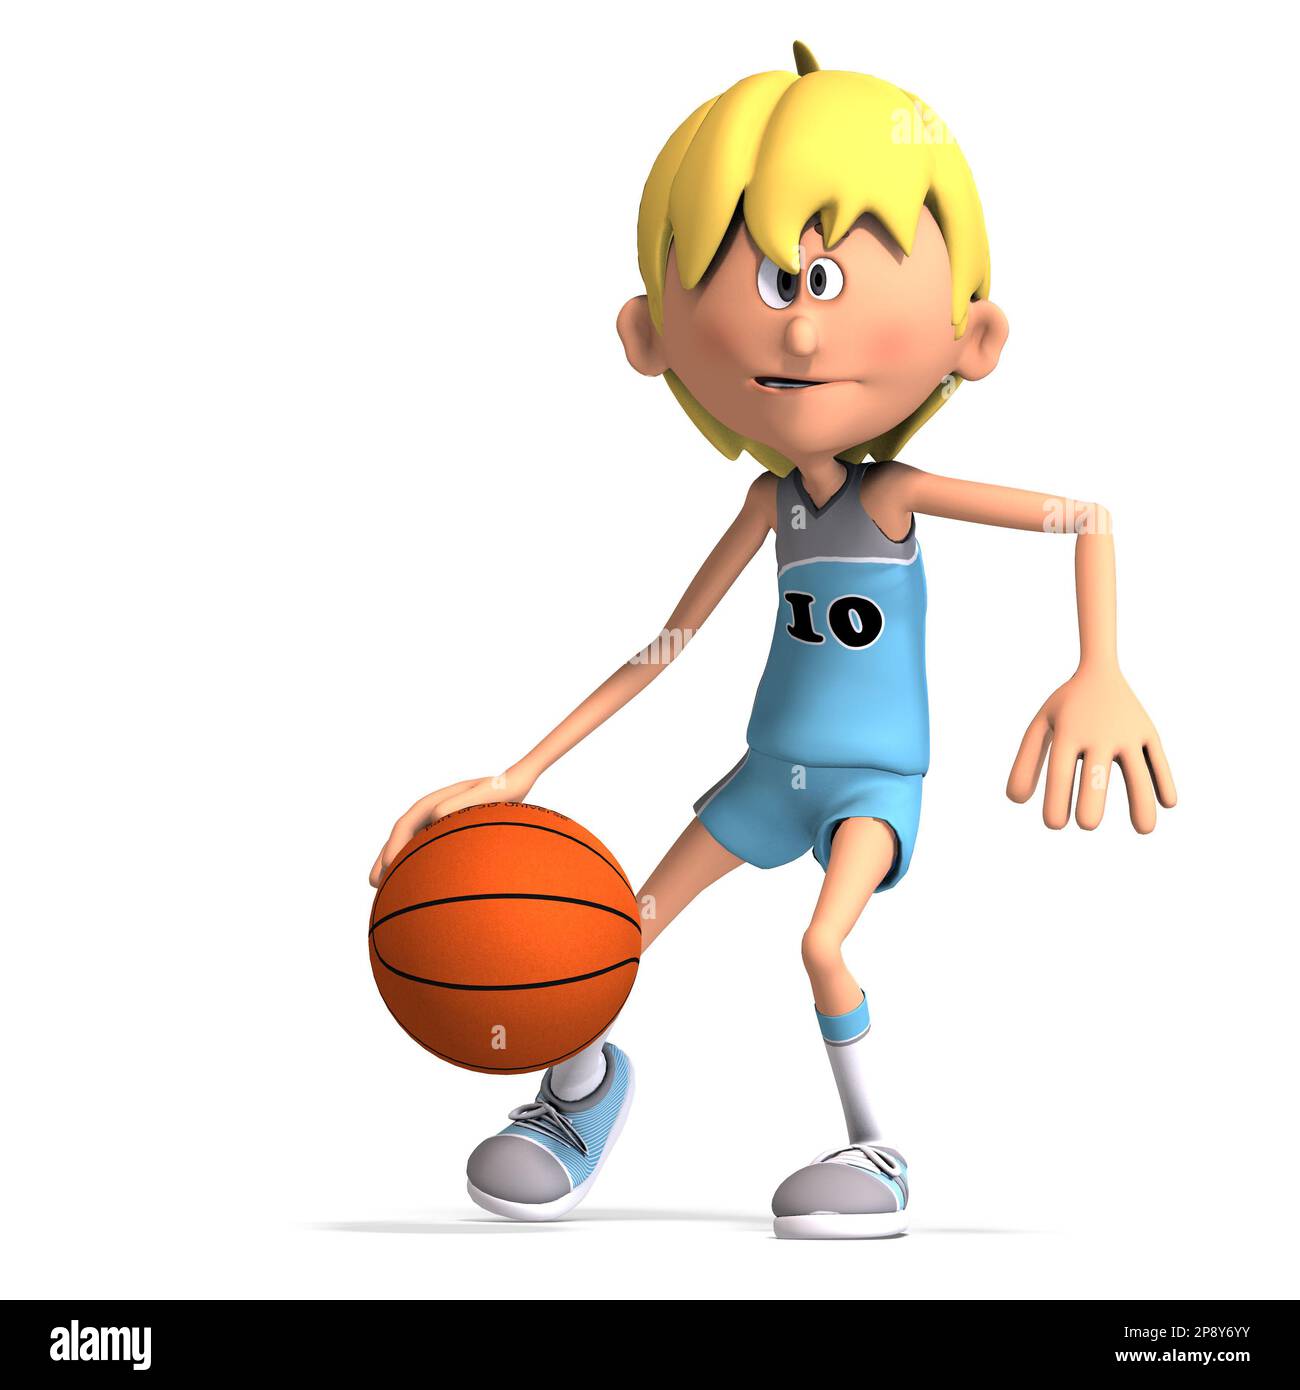 3D-illustration of a cute and funny cartoon basketball player ...